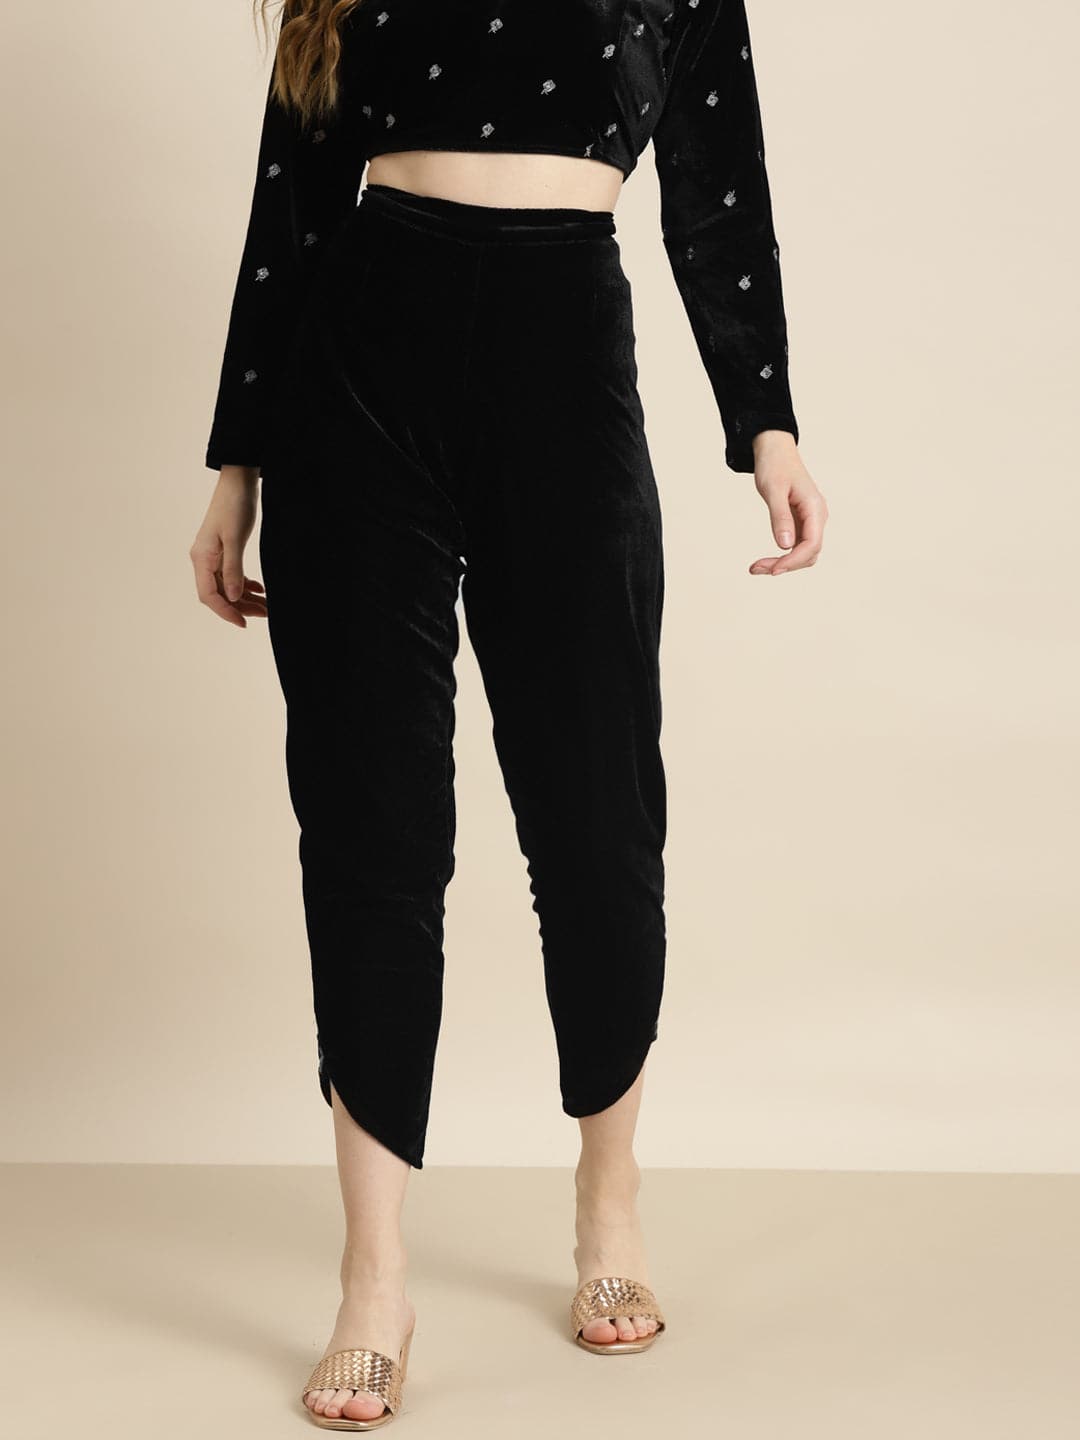 The Colette Cropped Wide-Leg Velvet Pants by Maeve | Anthropologie  Singapore - Women's Clothing, Accessories & Home